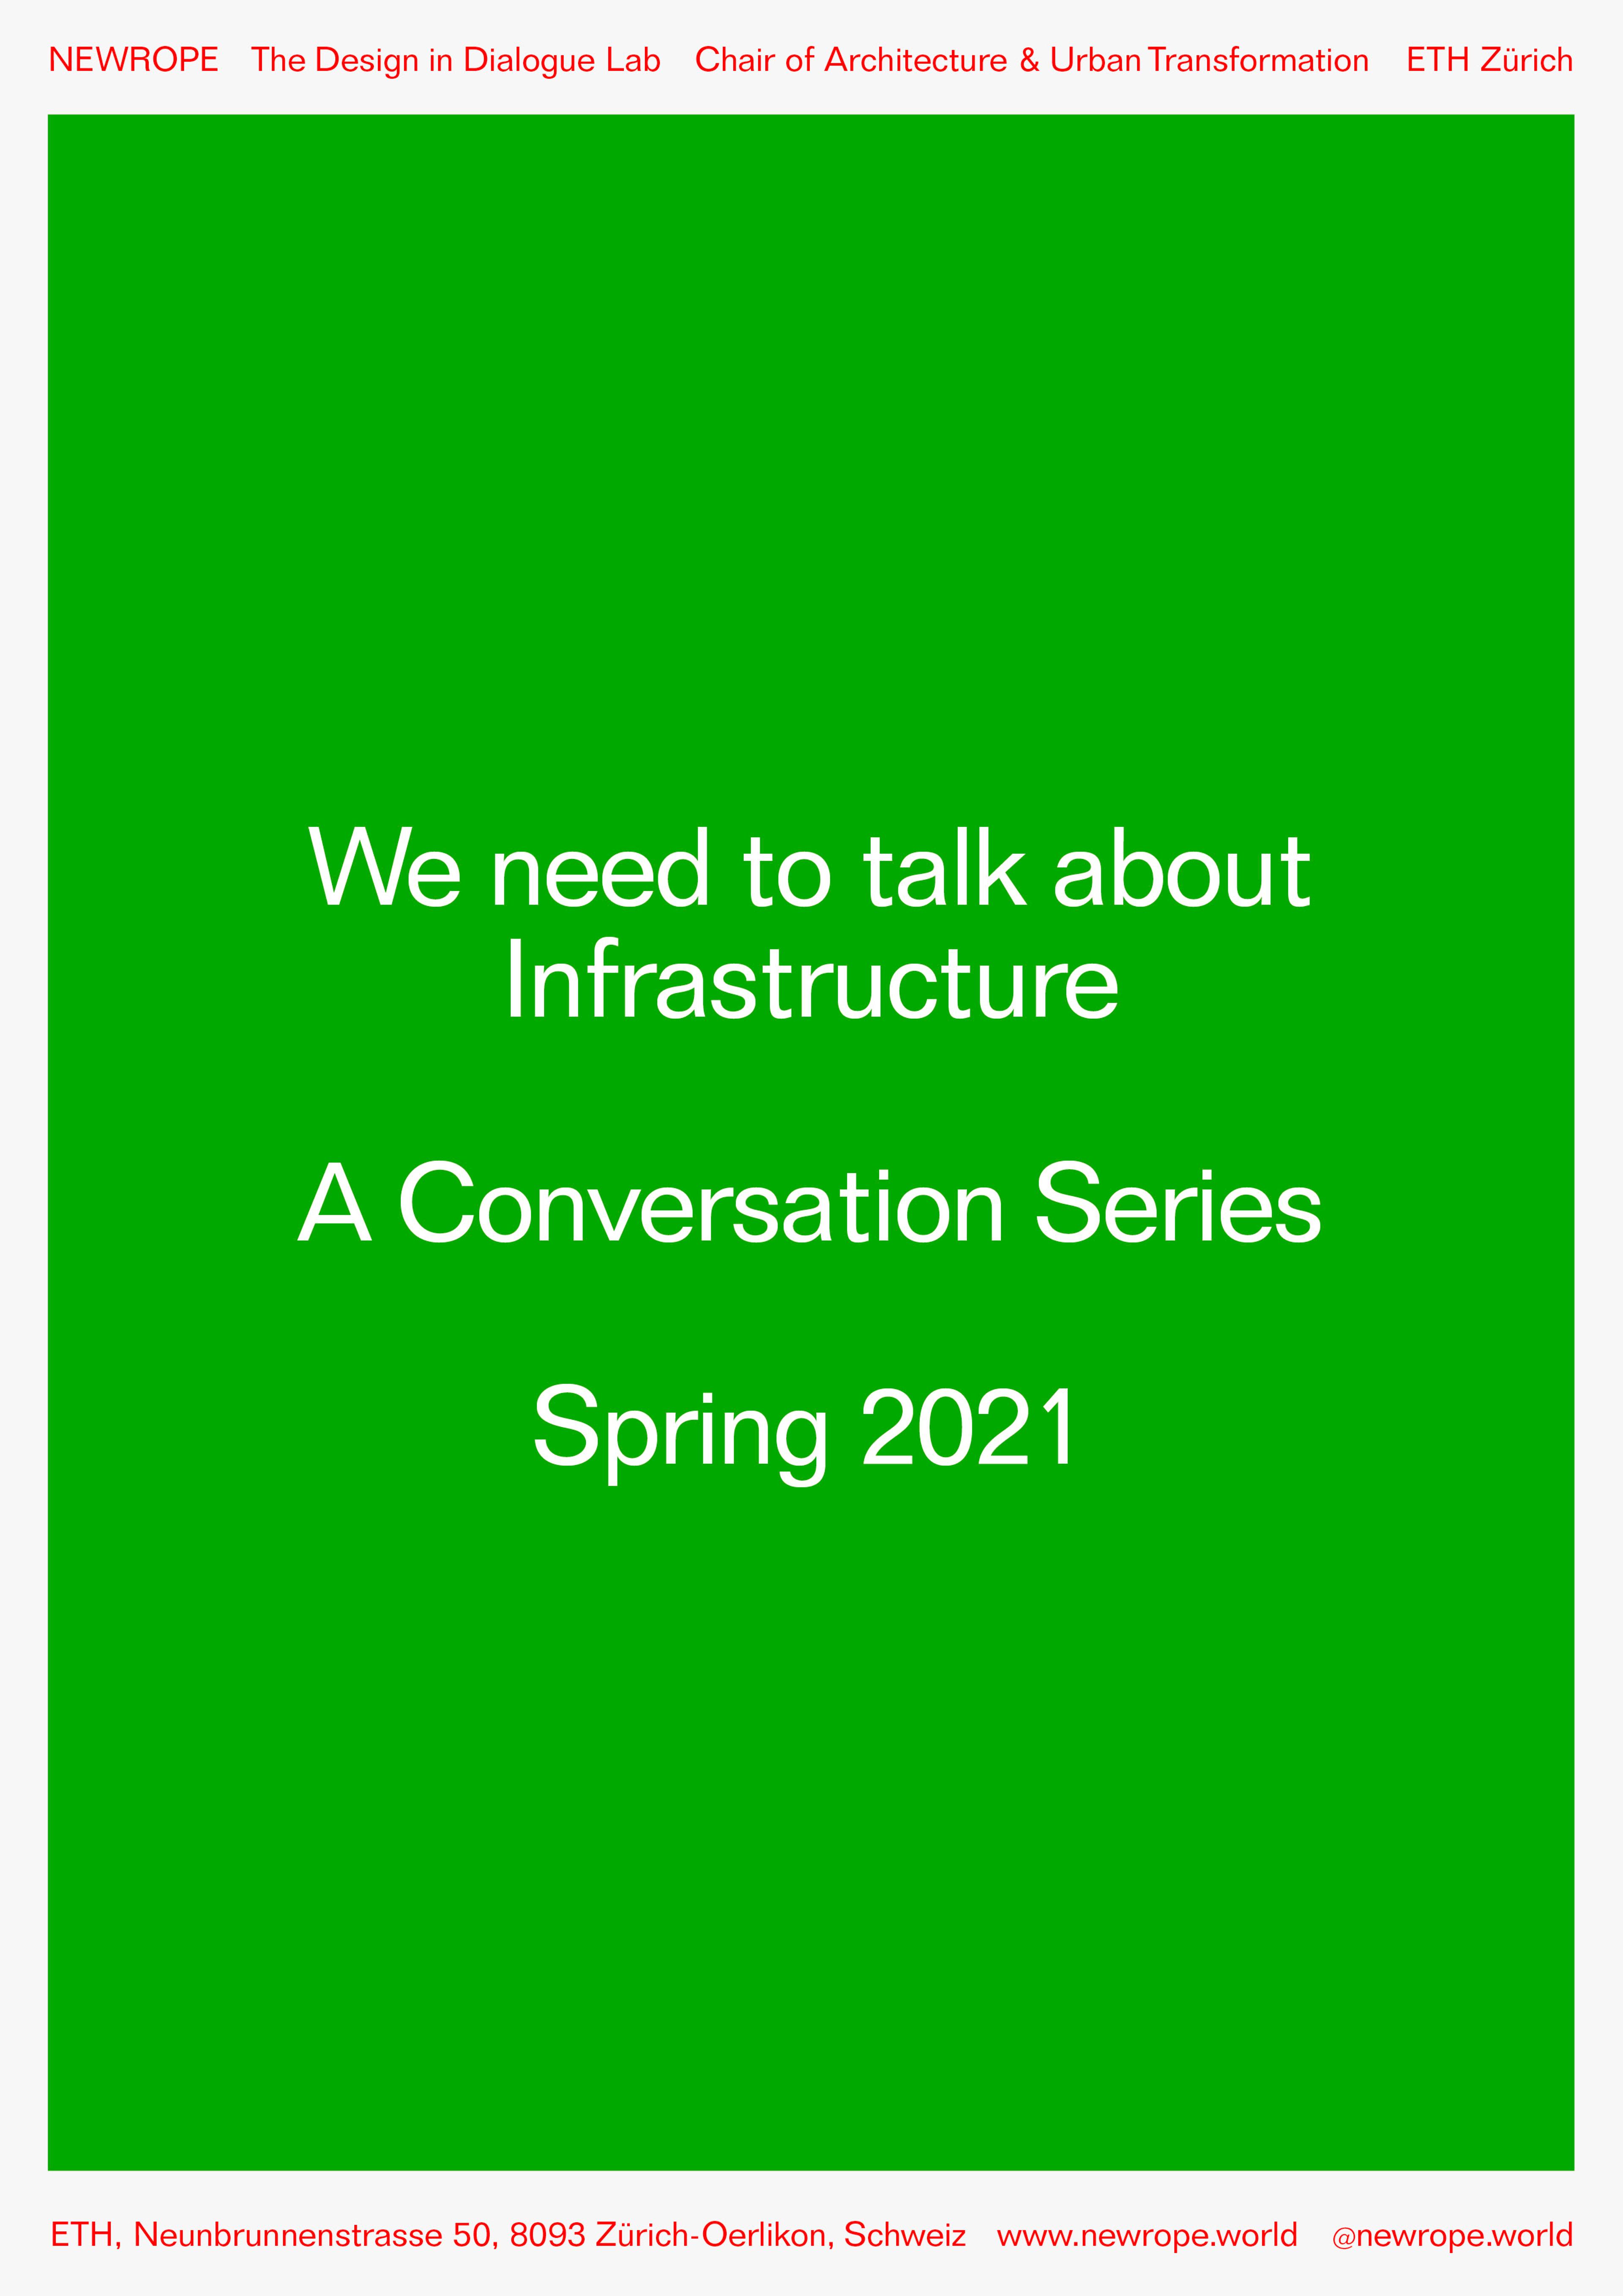 Announcement: We need to talk about Infrastructure – Conversation series